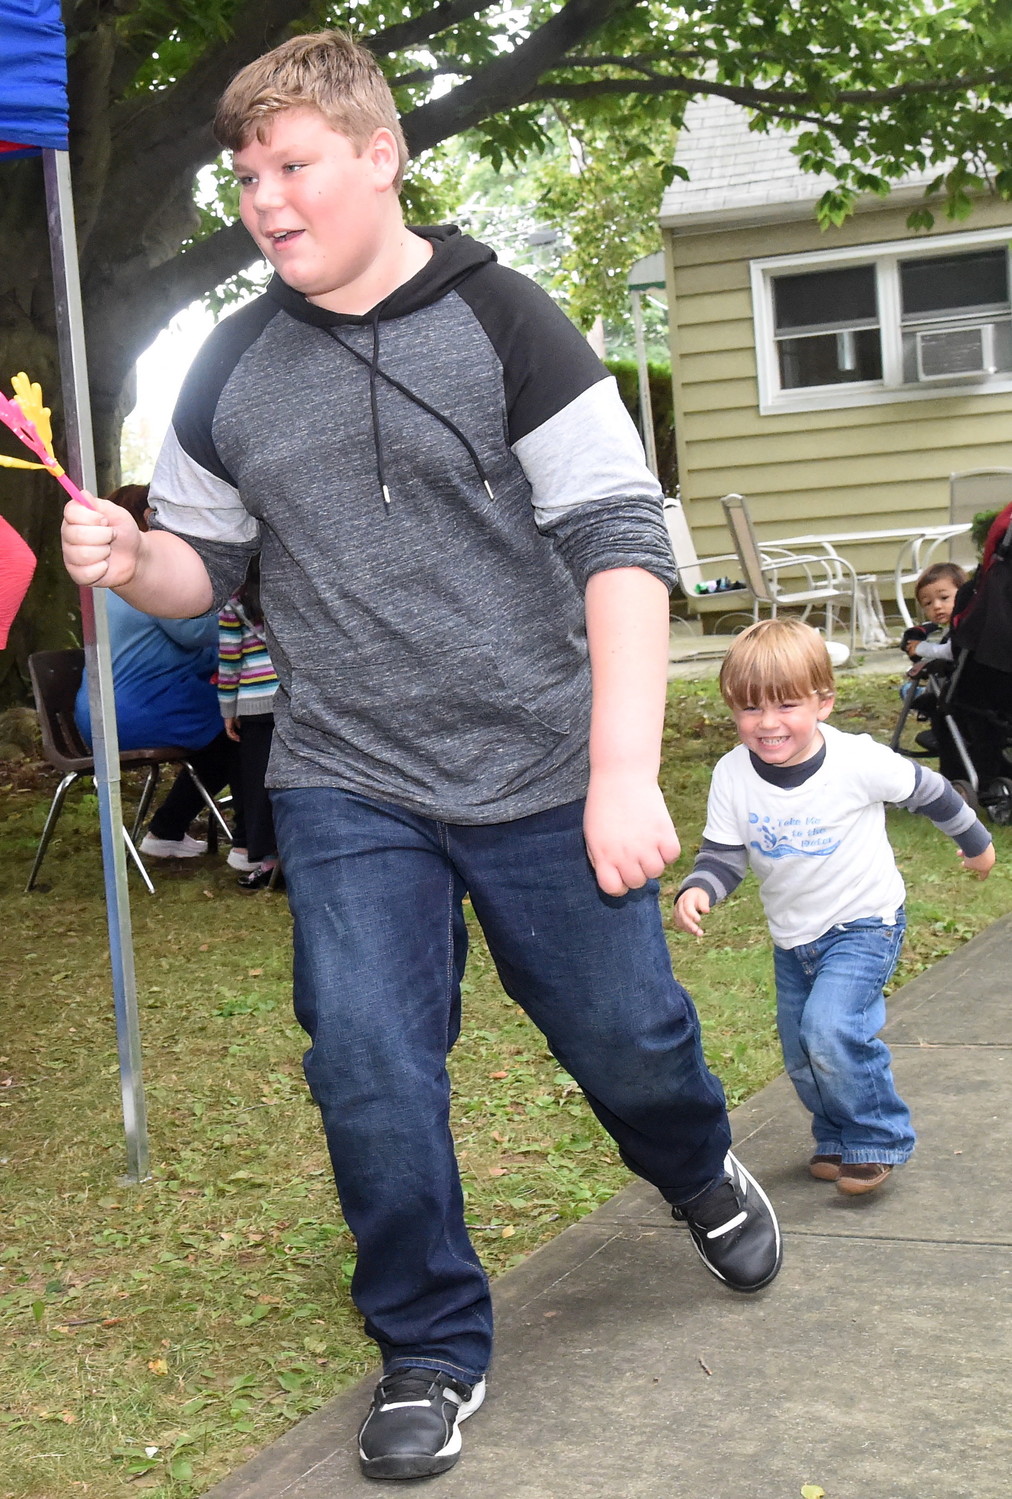 Two-year-old Luke chased his brother, Mathais Kraus, 12, throughout the festival at Holy Trinity Orthodox Church’s annual festival.